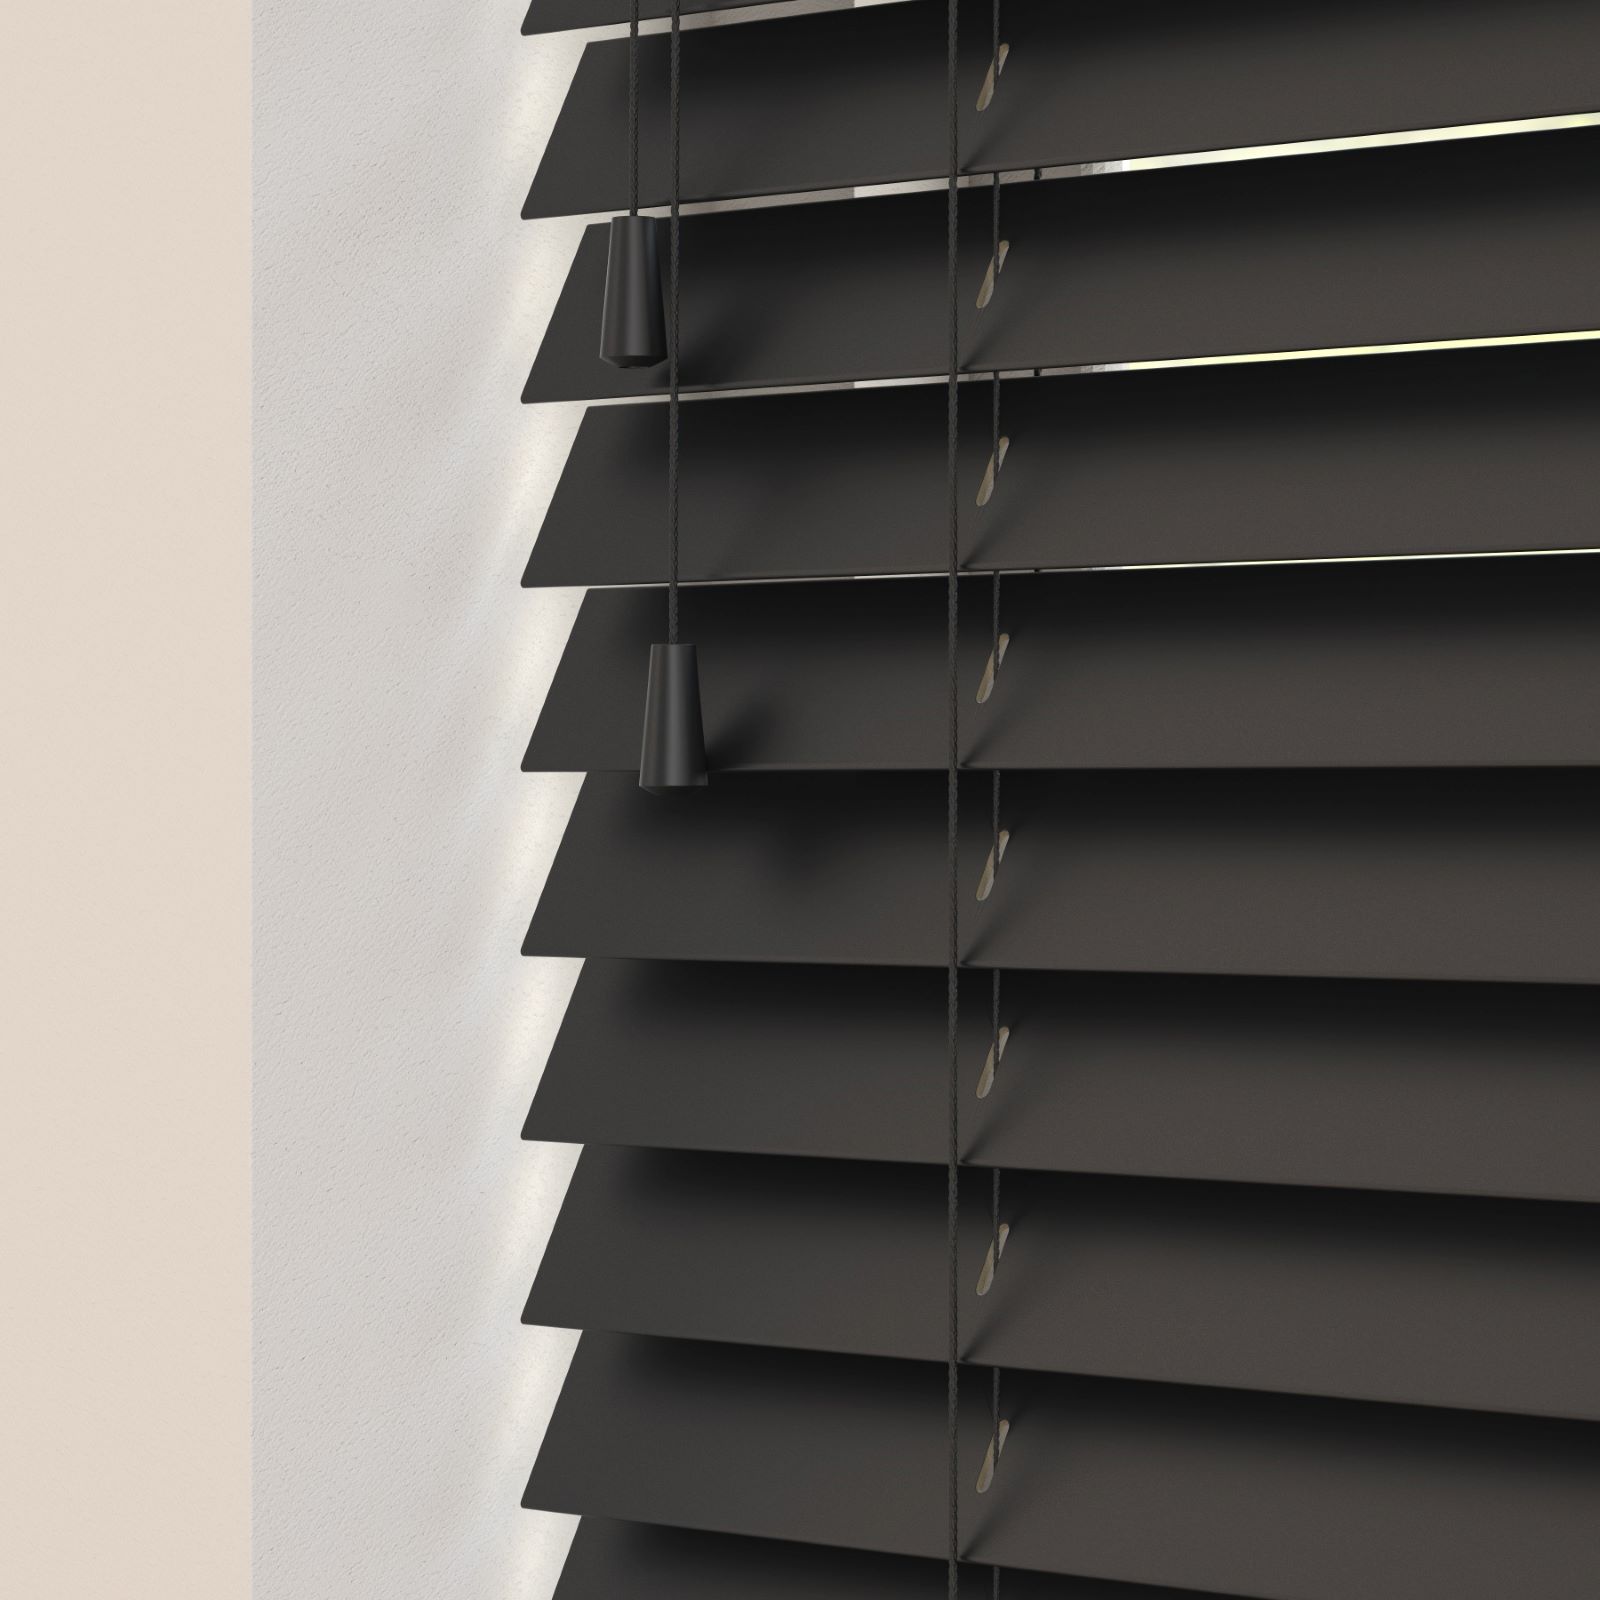 Suppliers of Contemporary Venetian Blinds In Grey And White UK